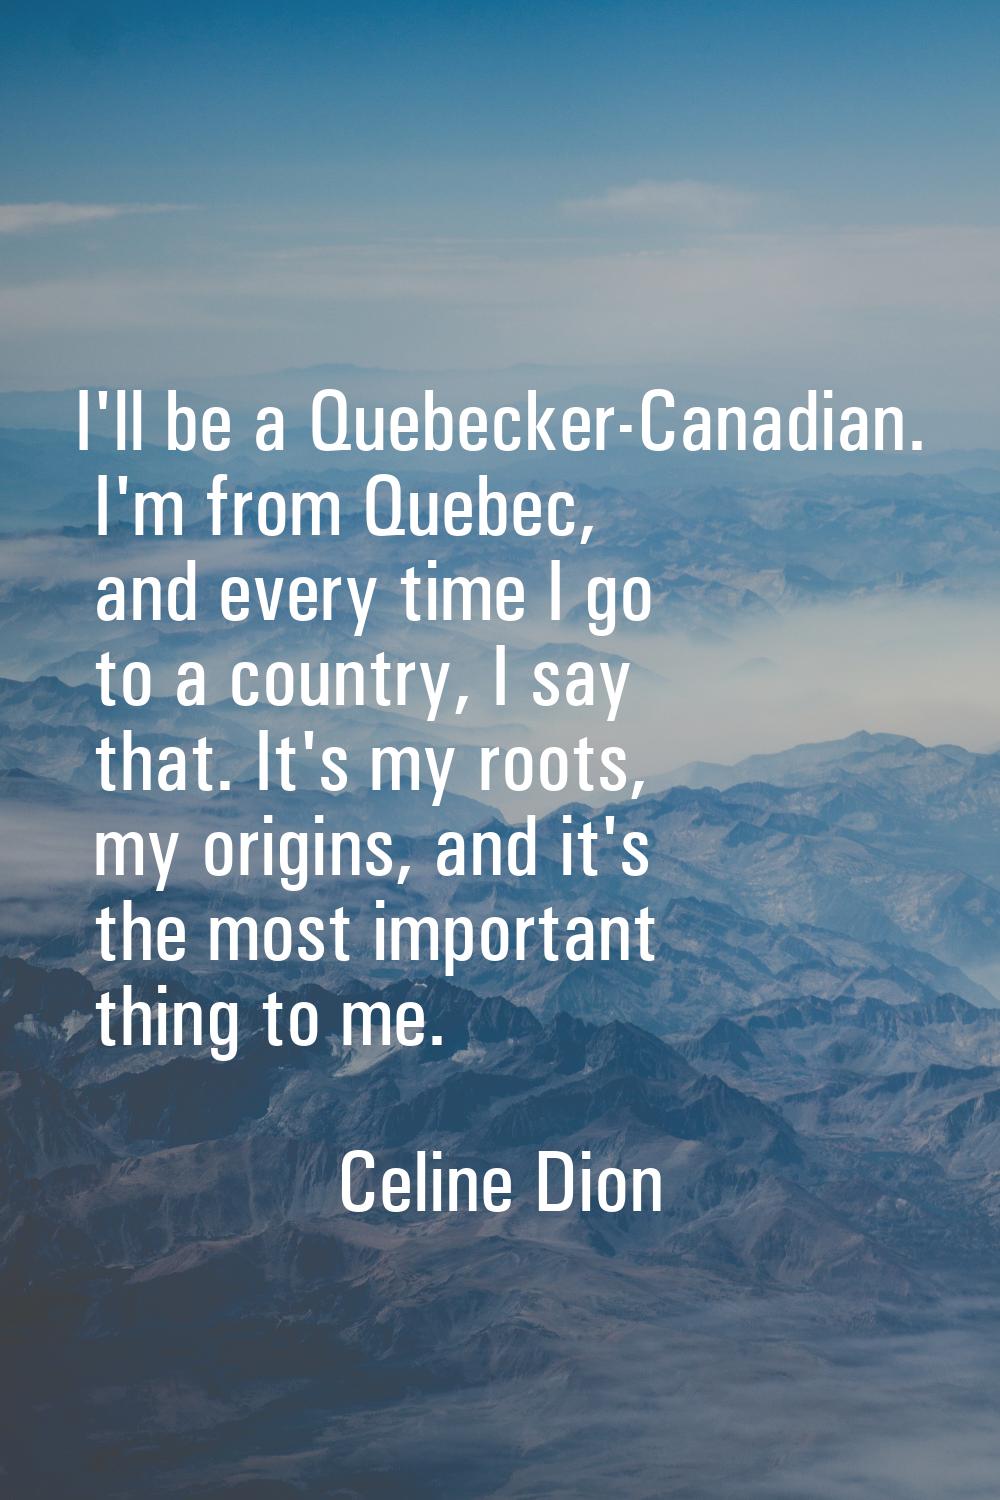 I'll be a Quebecker-Canadian. I'm from Quebec, and every time I go to a country, I say that. It's m